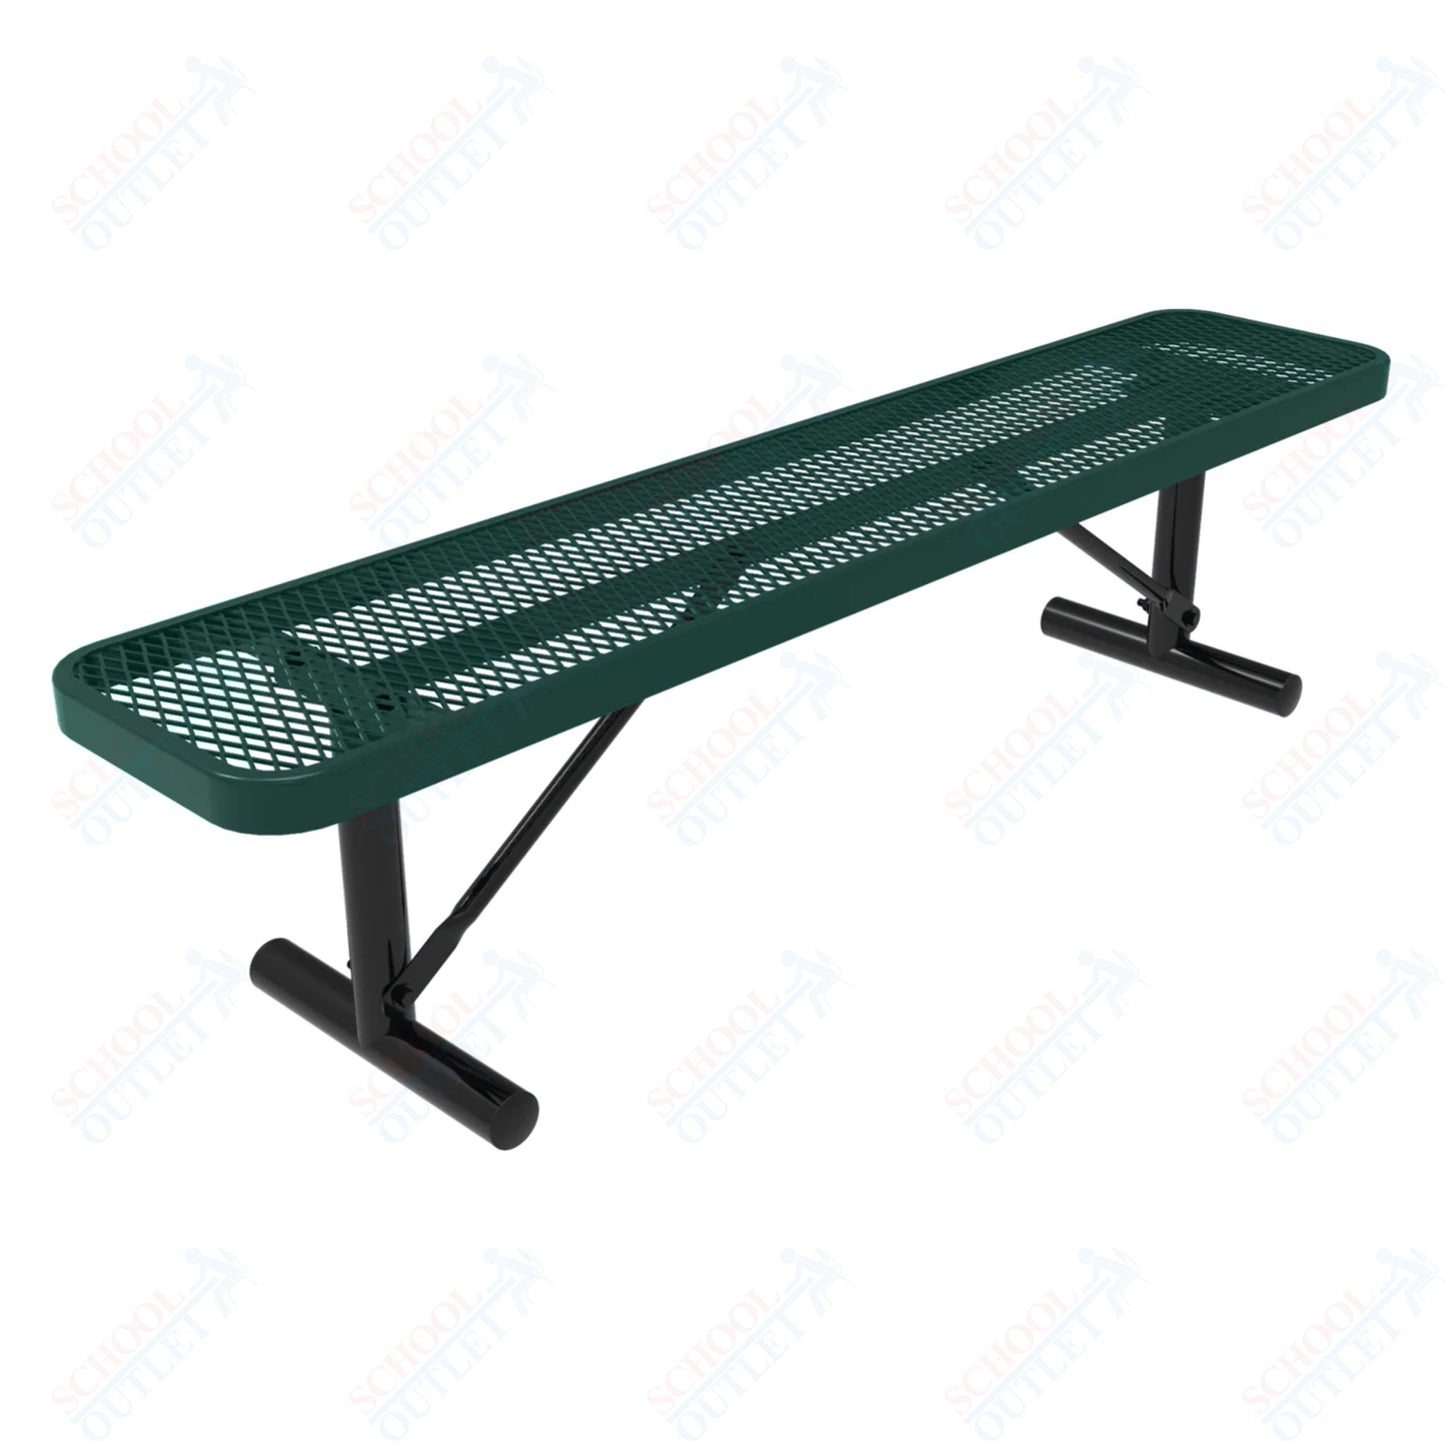 MyTcoat - Player's Outdoor Portable Bench without Back 6' L (MYT-BPY06-33)